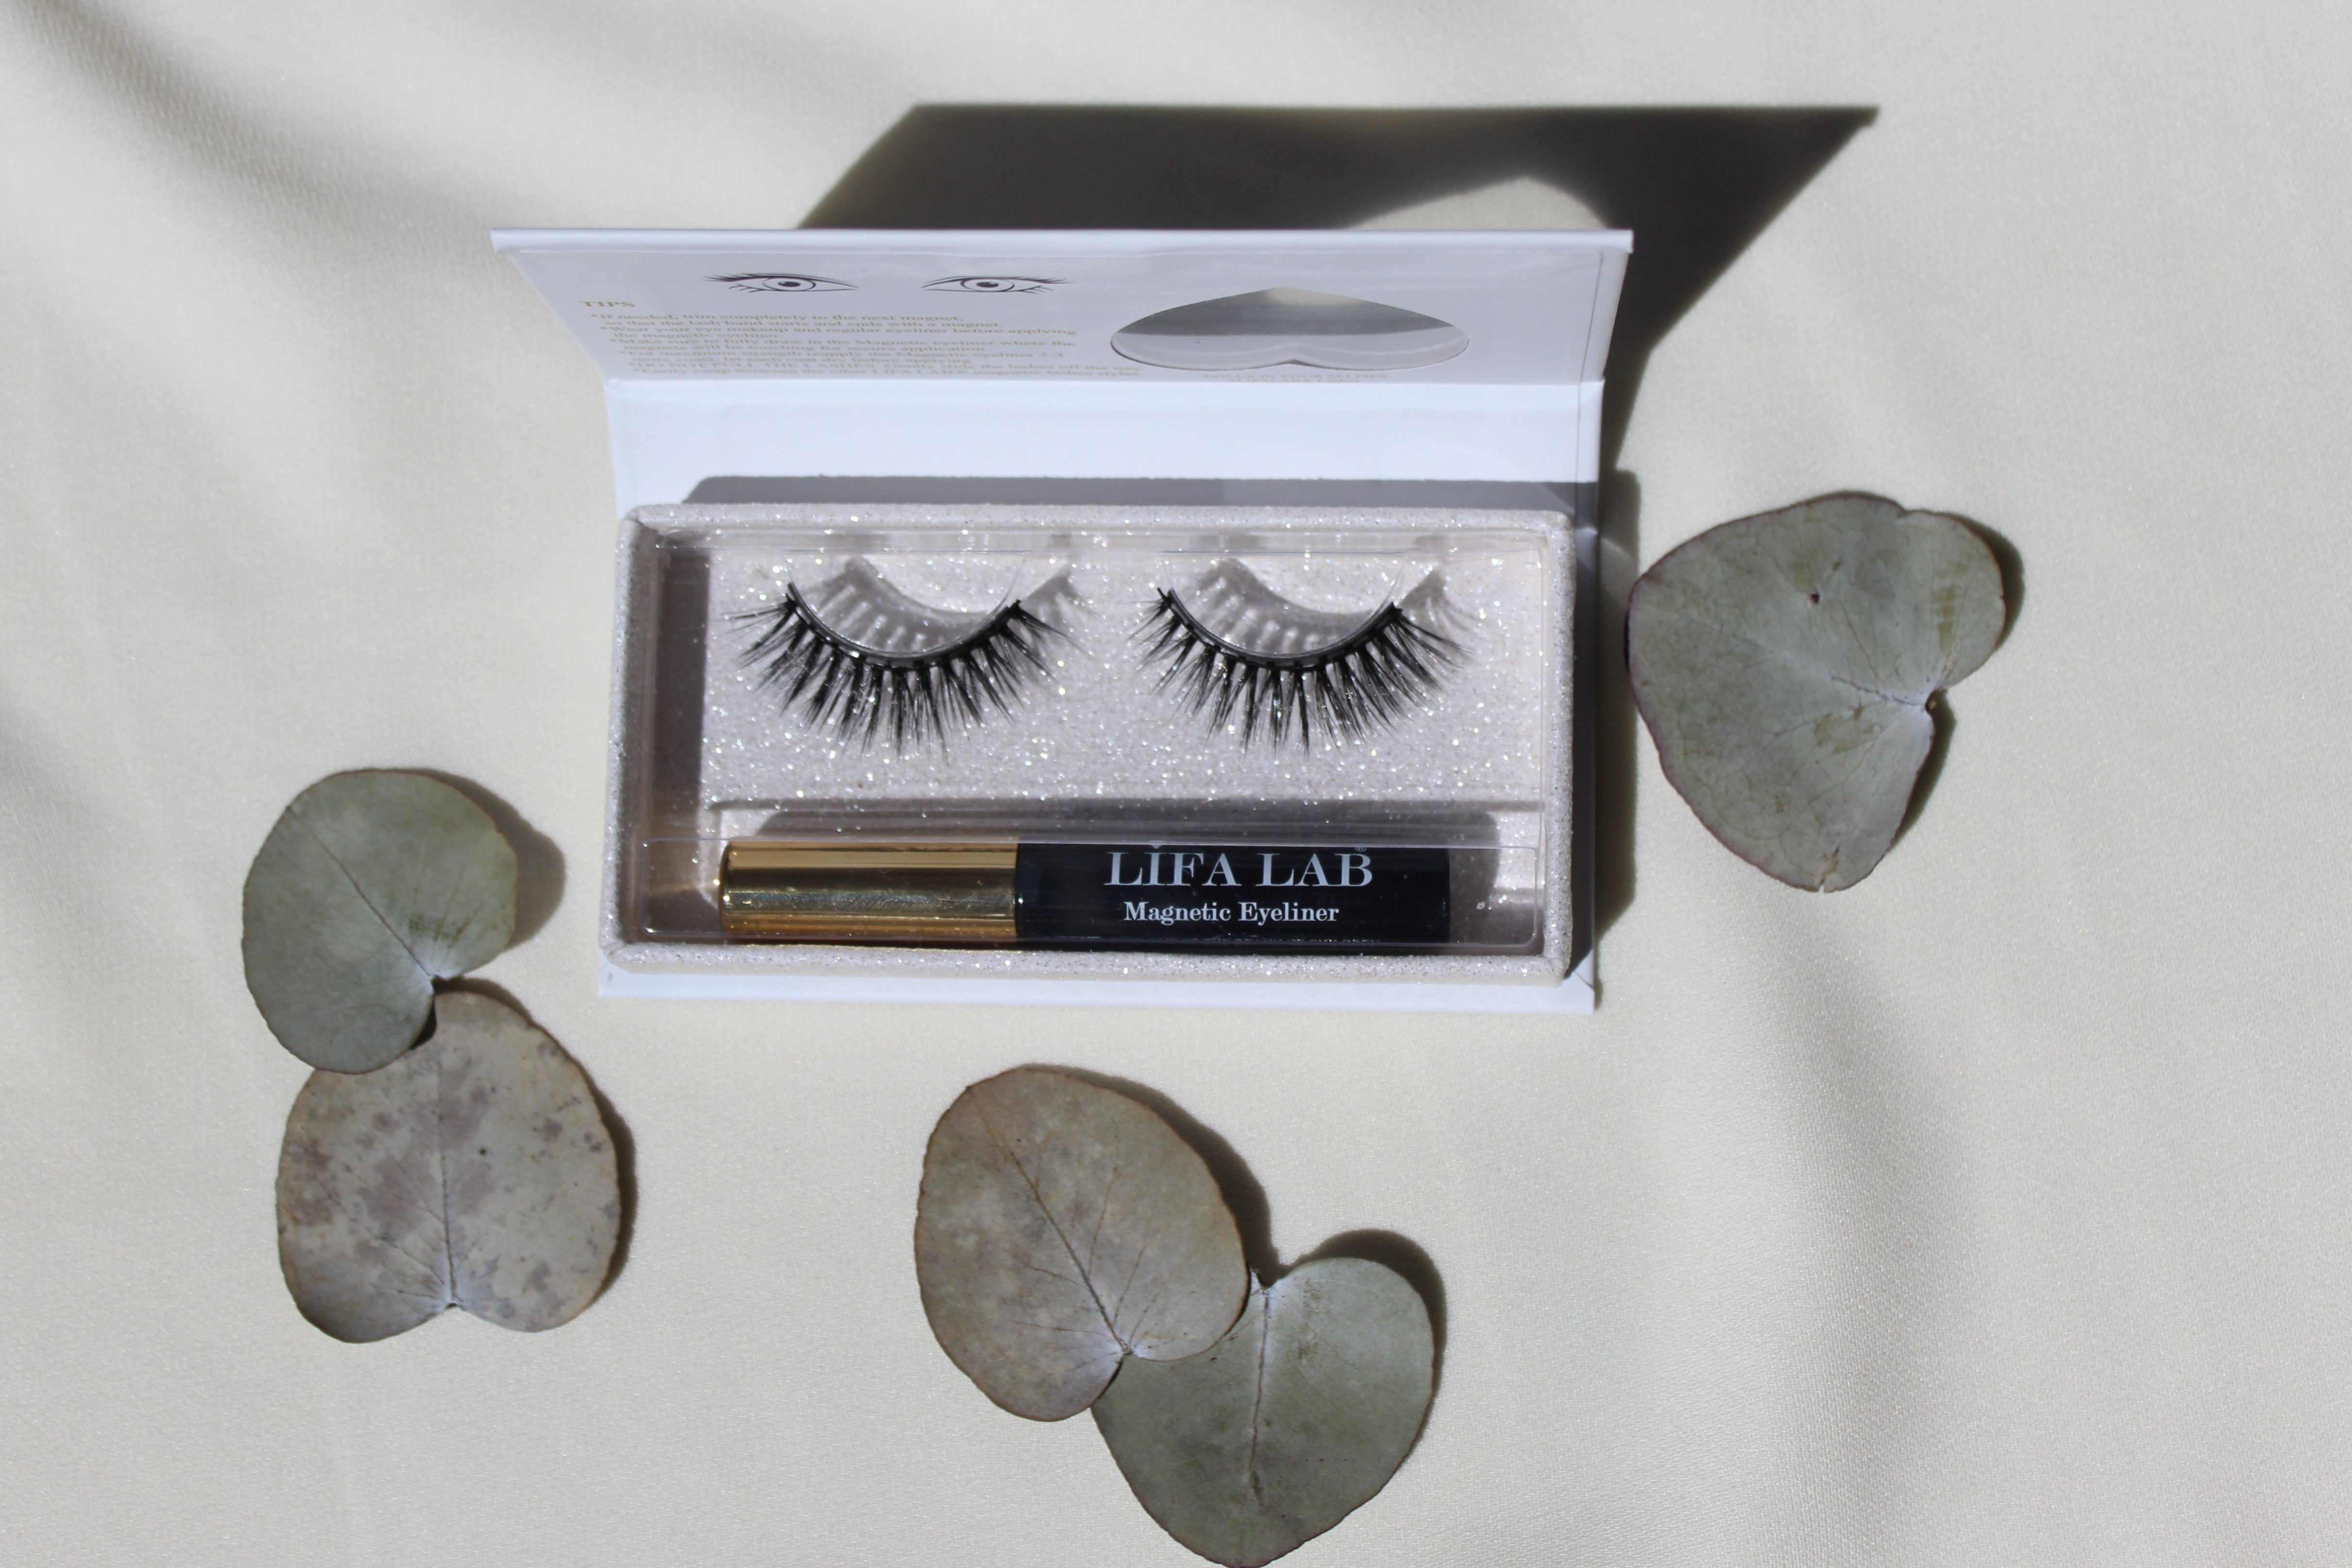 Vegan Magnetic Eyelashes DIY Kit - Daily GlamMagnetic long salon eyelash from natural fibre with a magnetic black and gold eyeliner in three luxury boxes with a heart window on a white table cloth